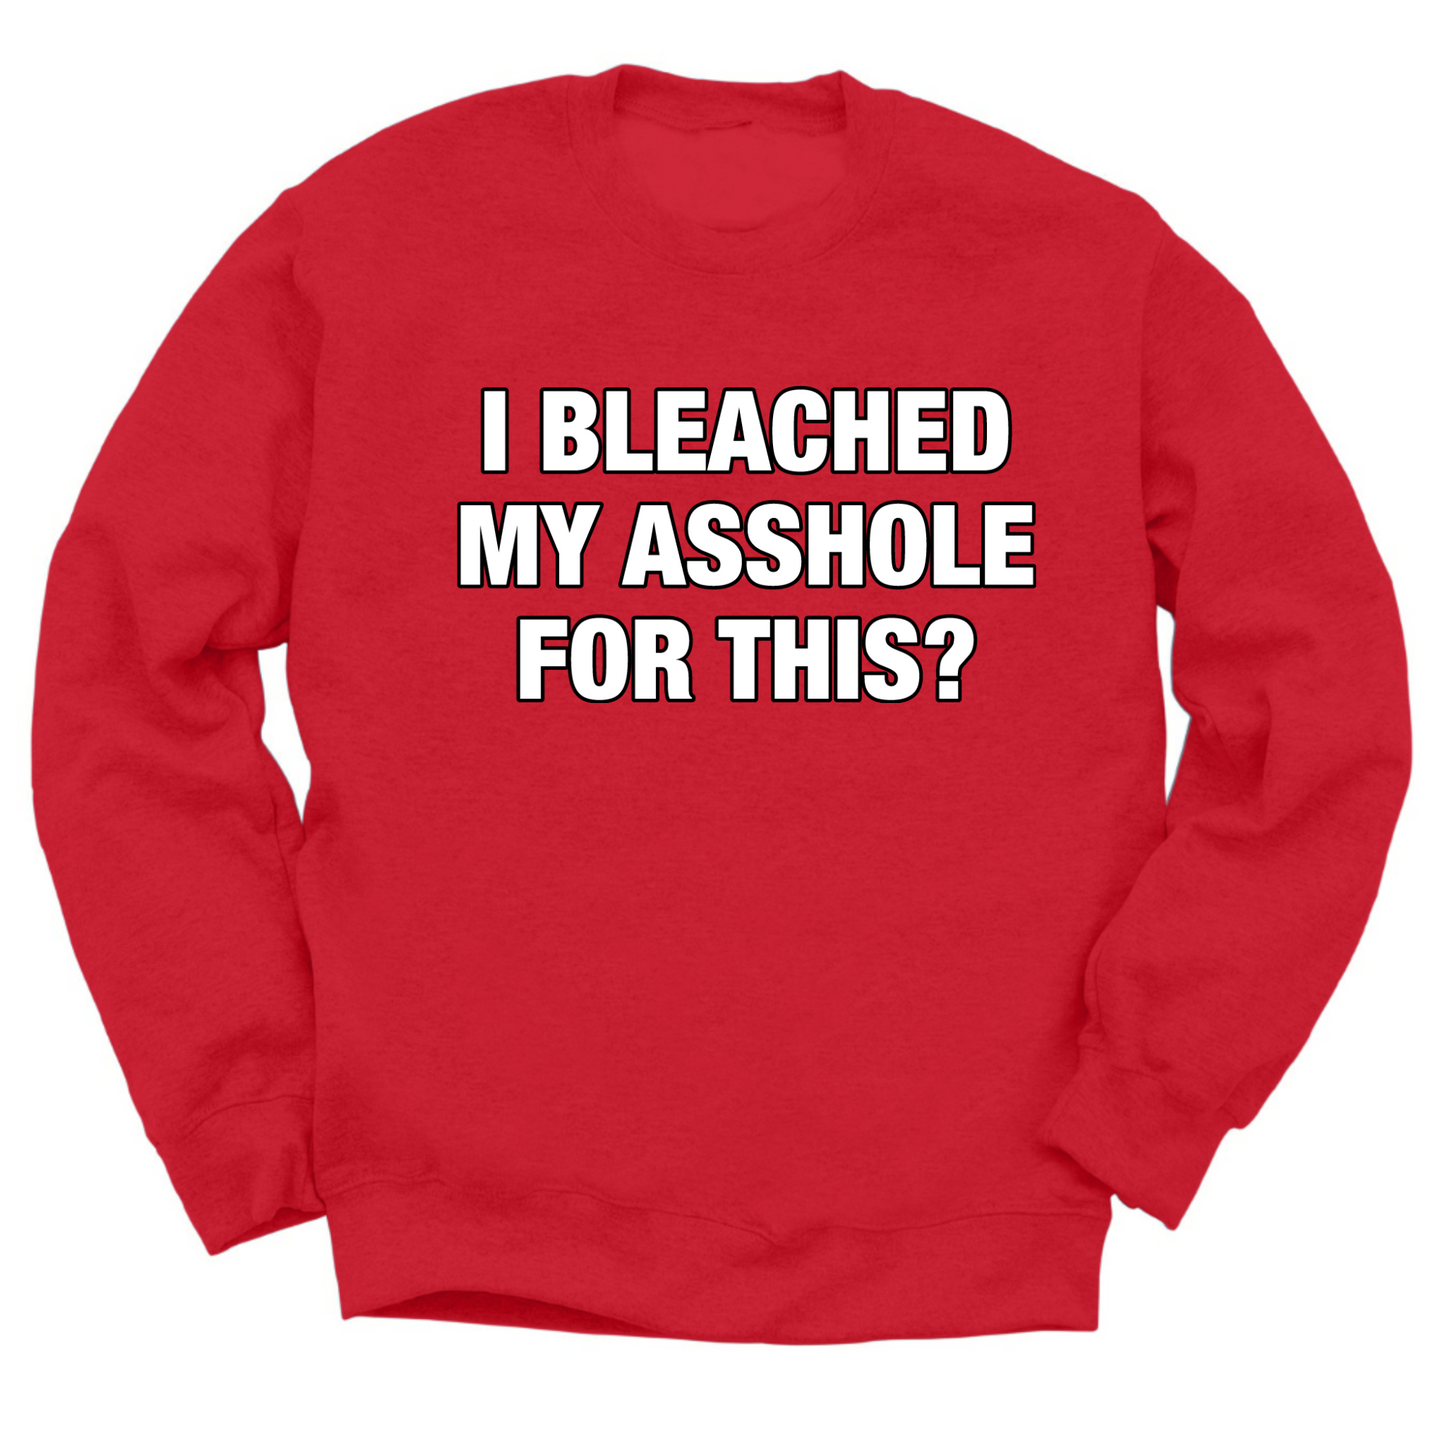 I Bleached My Asshole For This? Crewneck Sweater